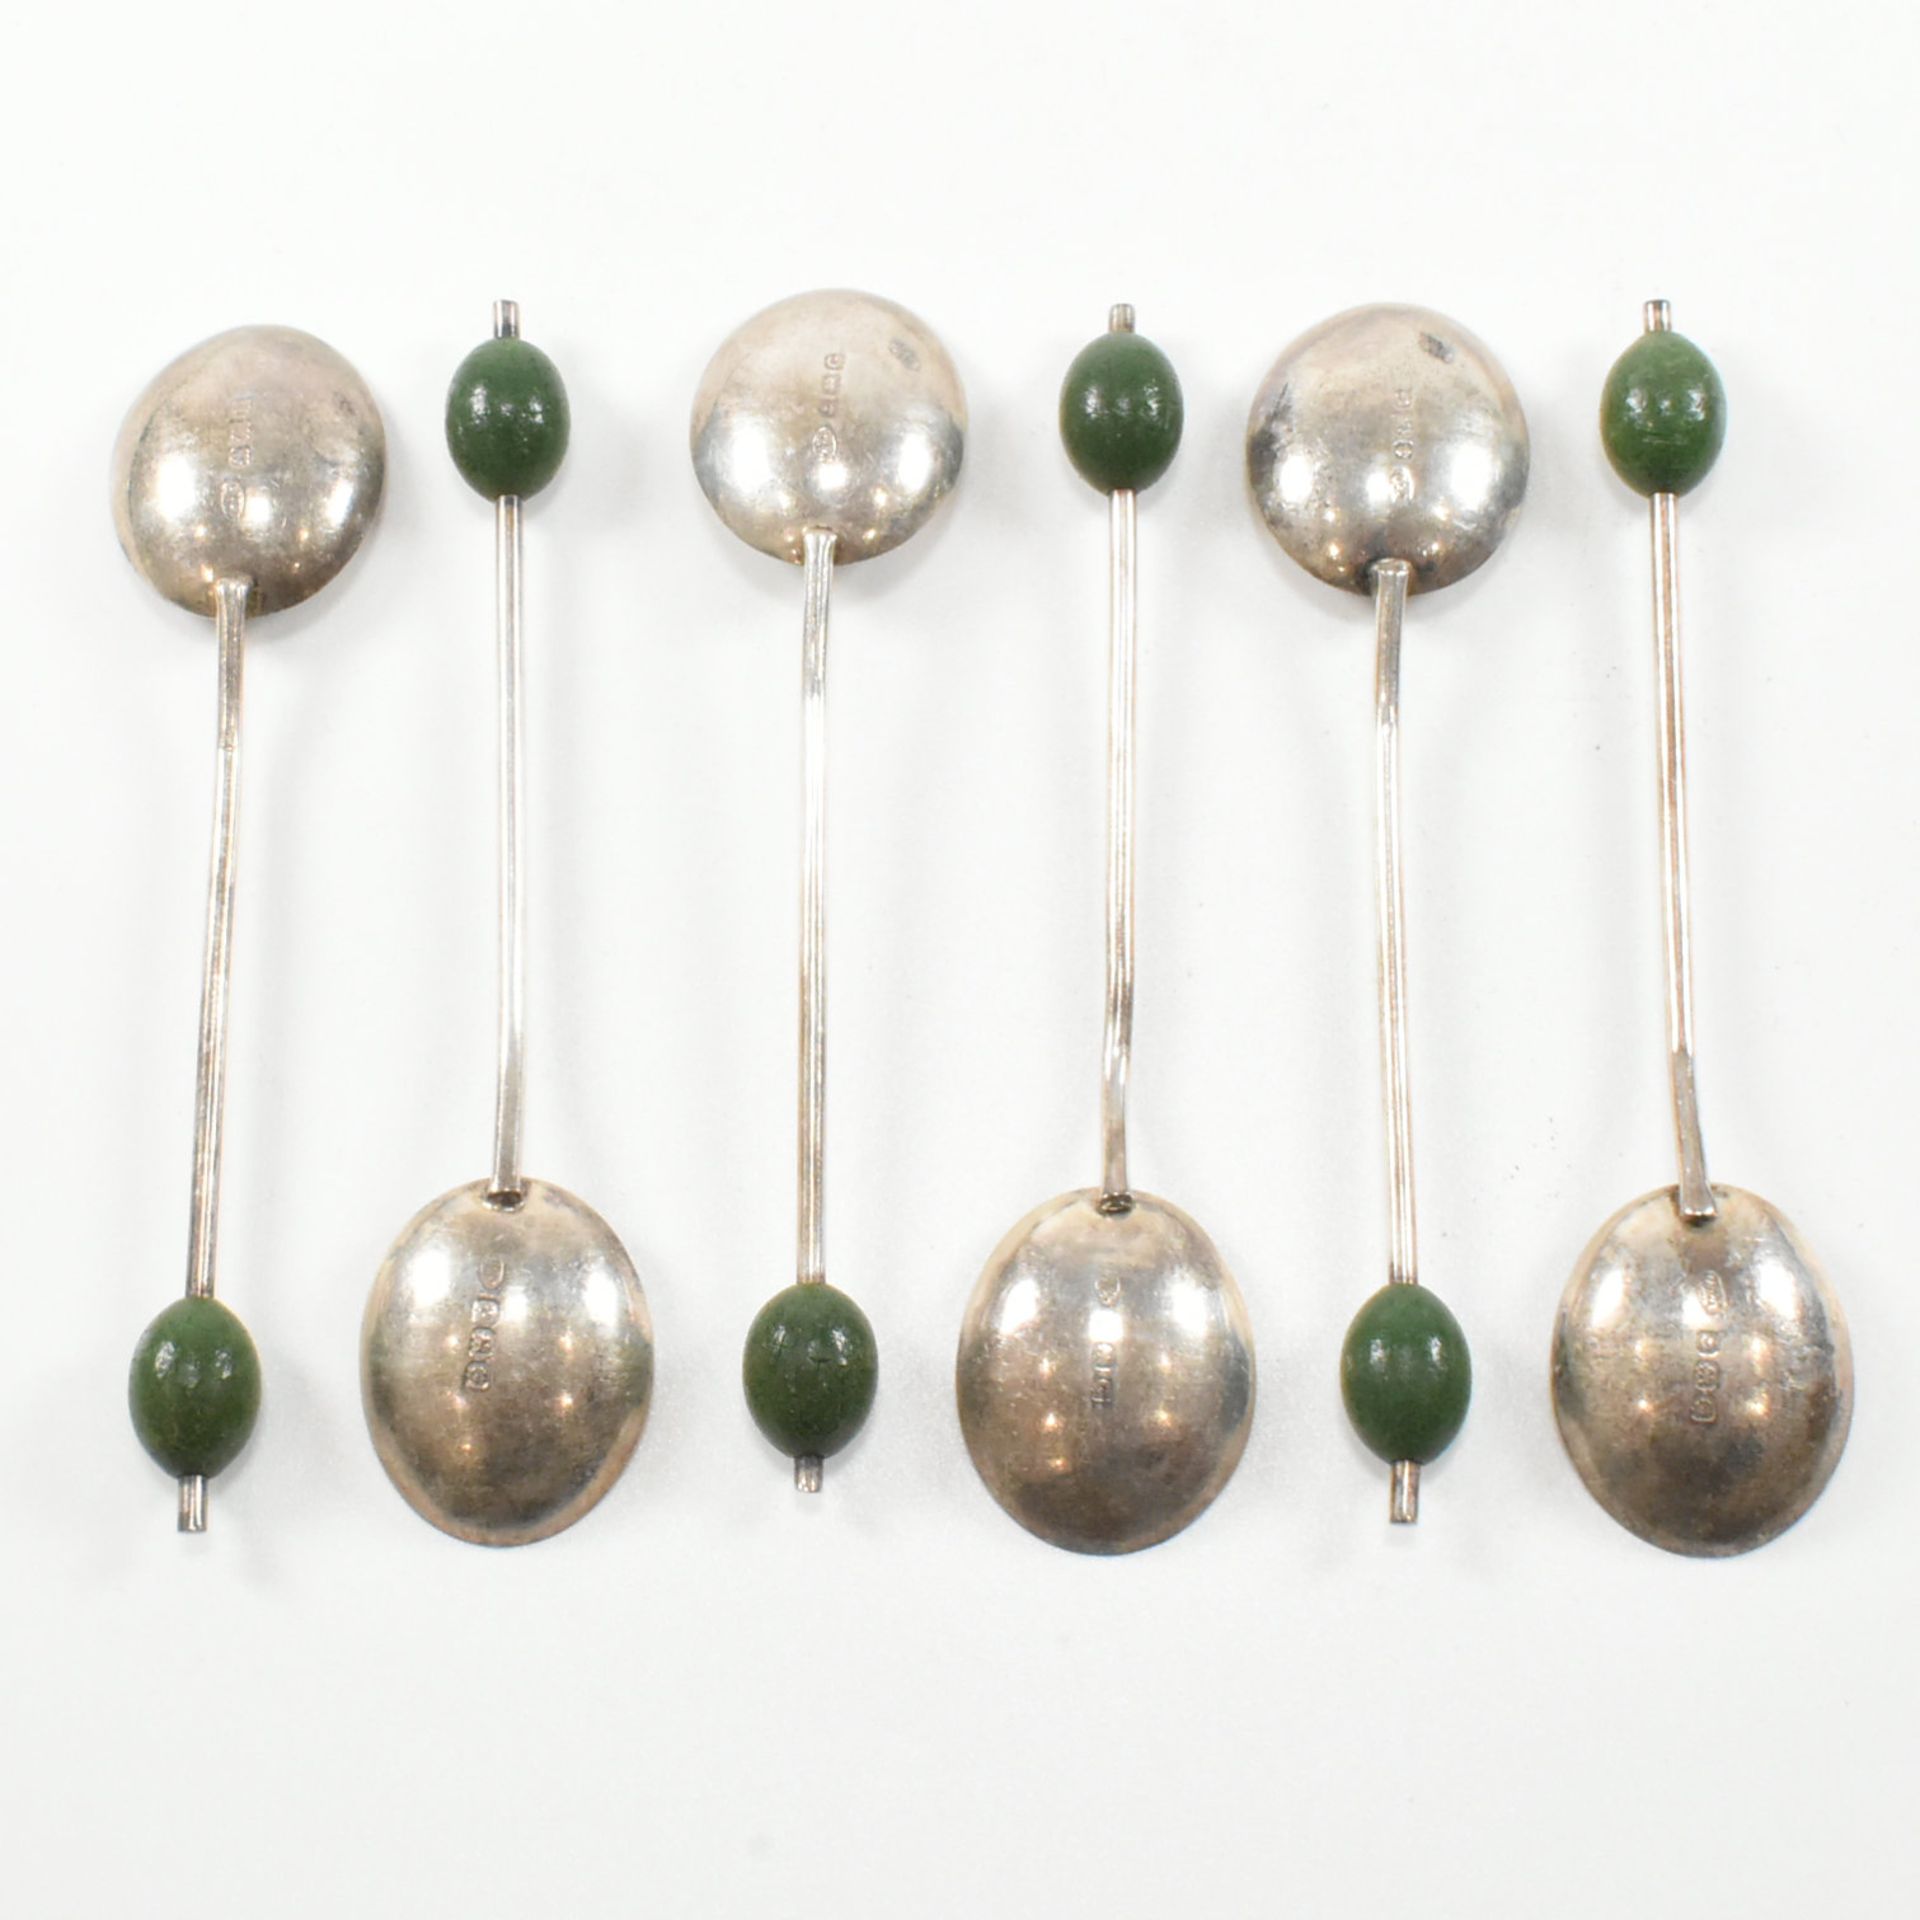 TWO CASED SETS OF HALLMARKED SILVER & BAKELITE COFFEE SPOONS - Image 3 of 8